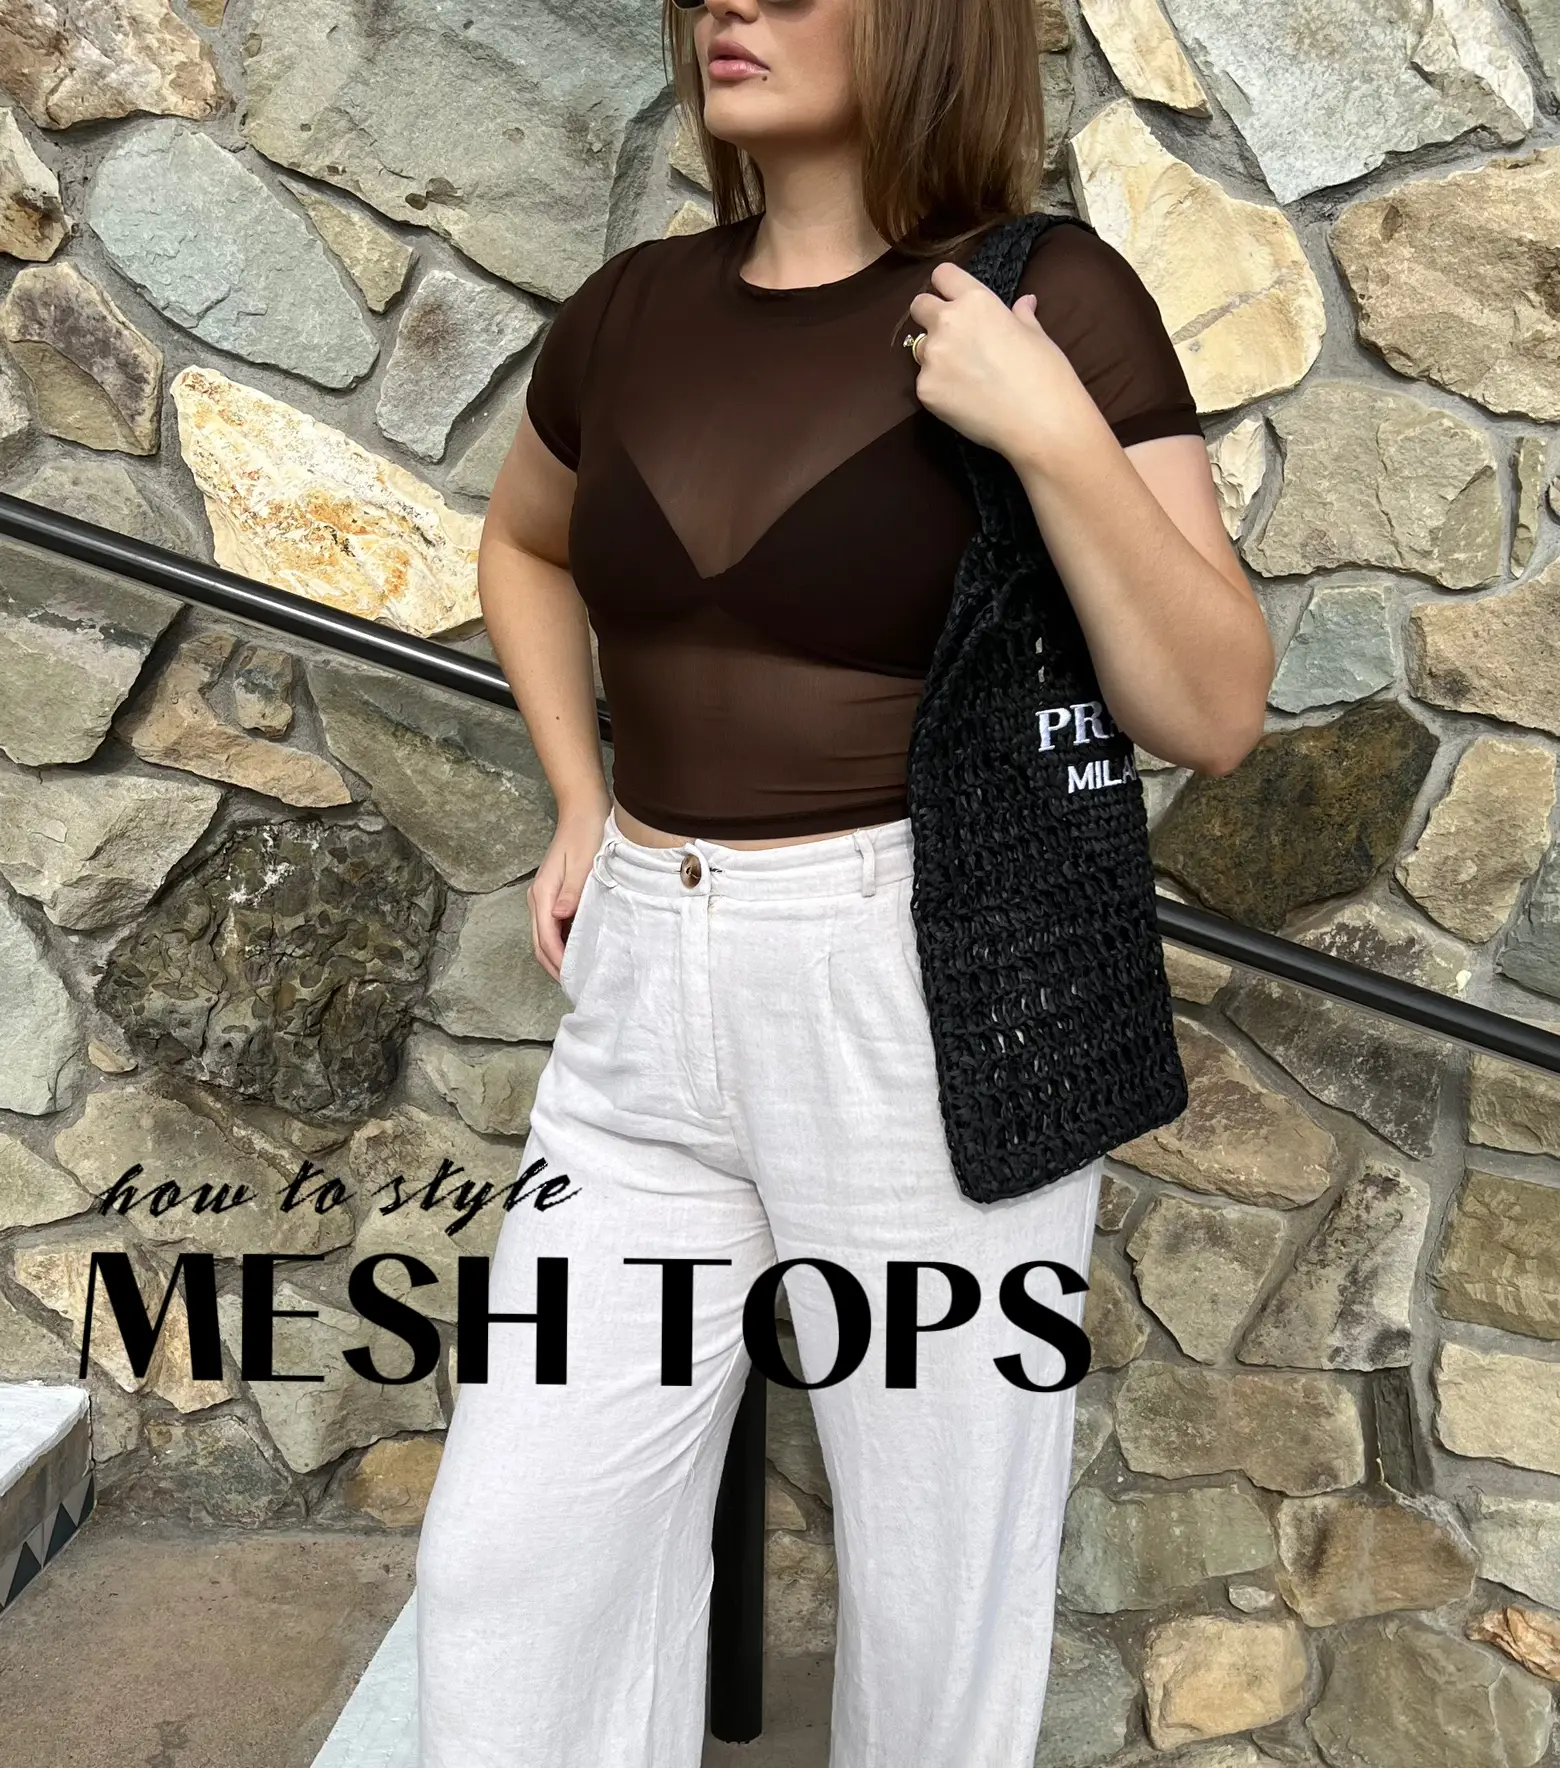 STYLING MESH TOPS 